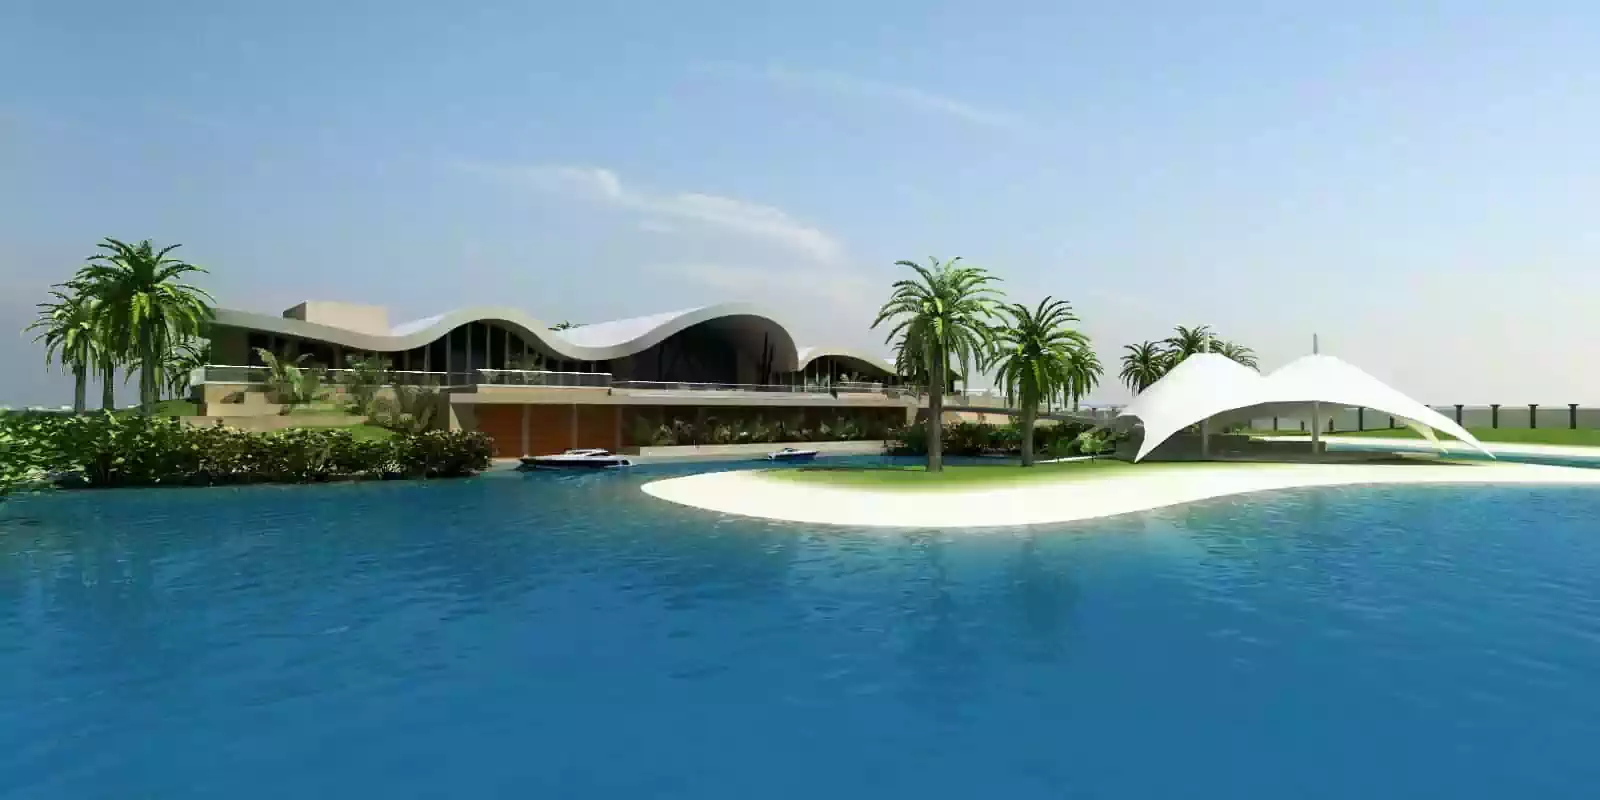 Beach villa with undulating roof and tensile structure on island. Large overhangs shade veranda overlooking ocean